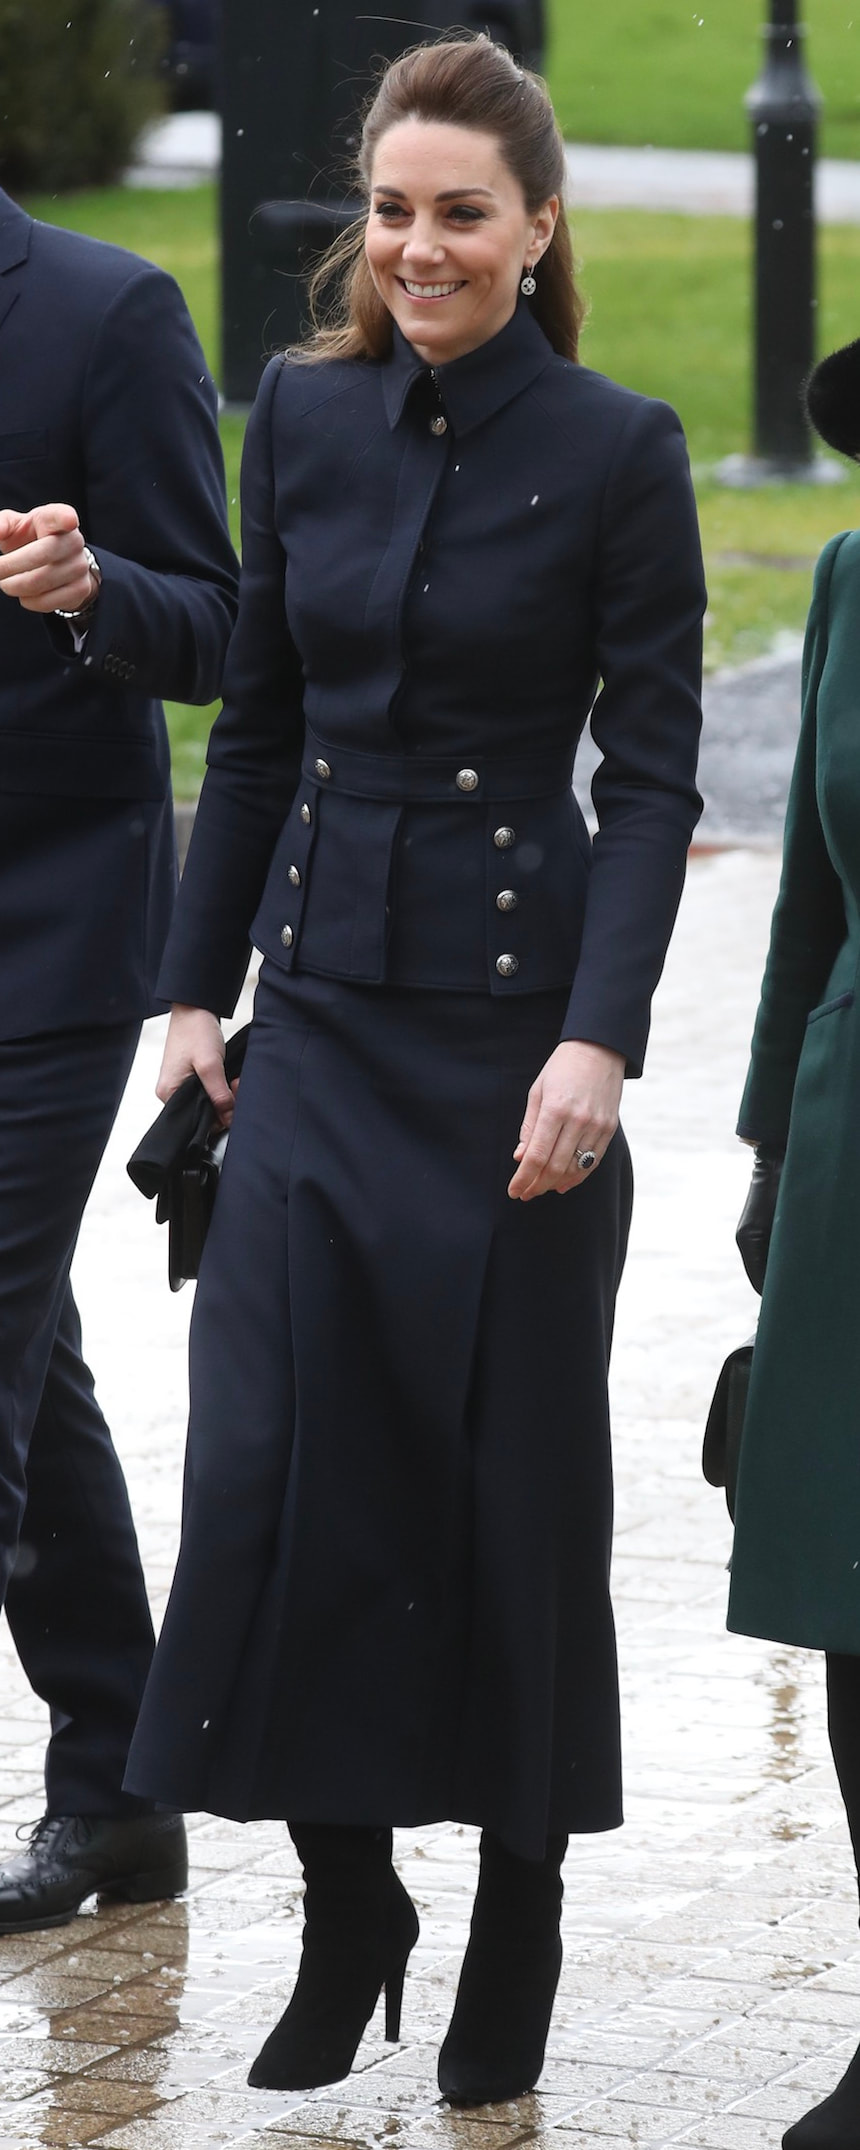 Alexander McQueen Wicca Black Leather Mini Satchel Bag as seen on Kate Middleton, The Duchess of Cambridge for visit to Defence Medical Rehabilitation Centre